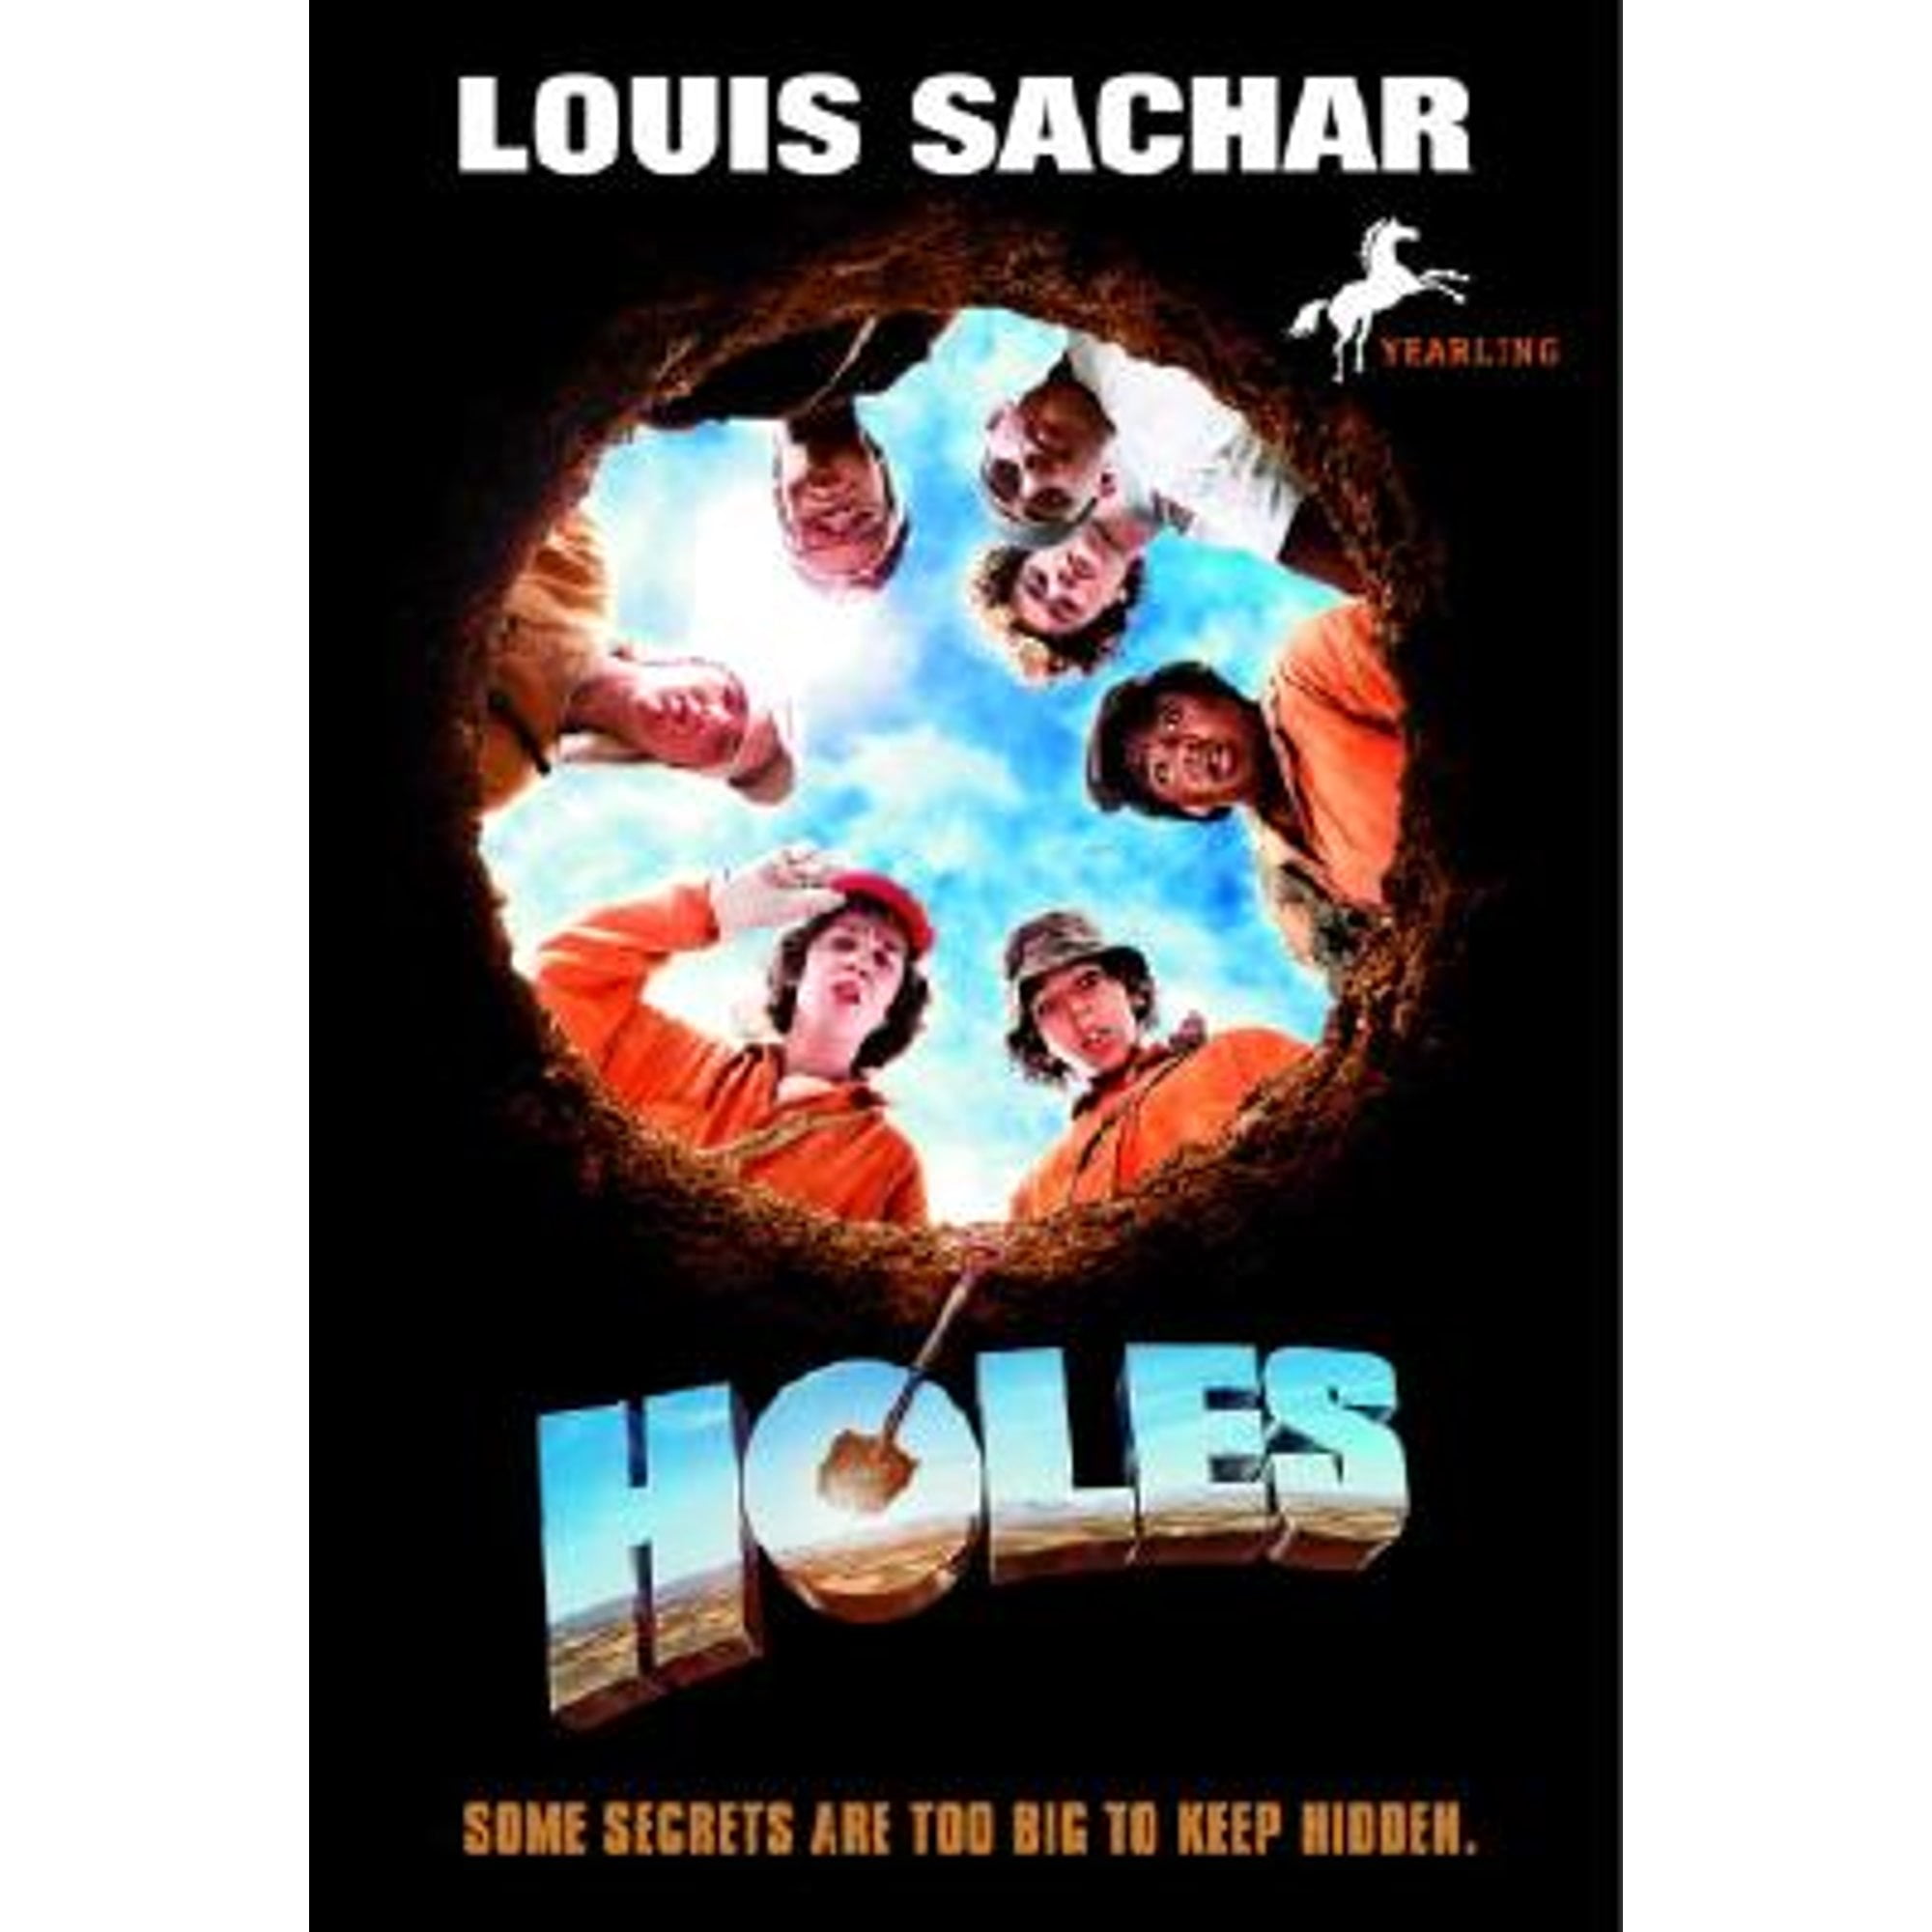 Holes Paperback by Louis Sachar